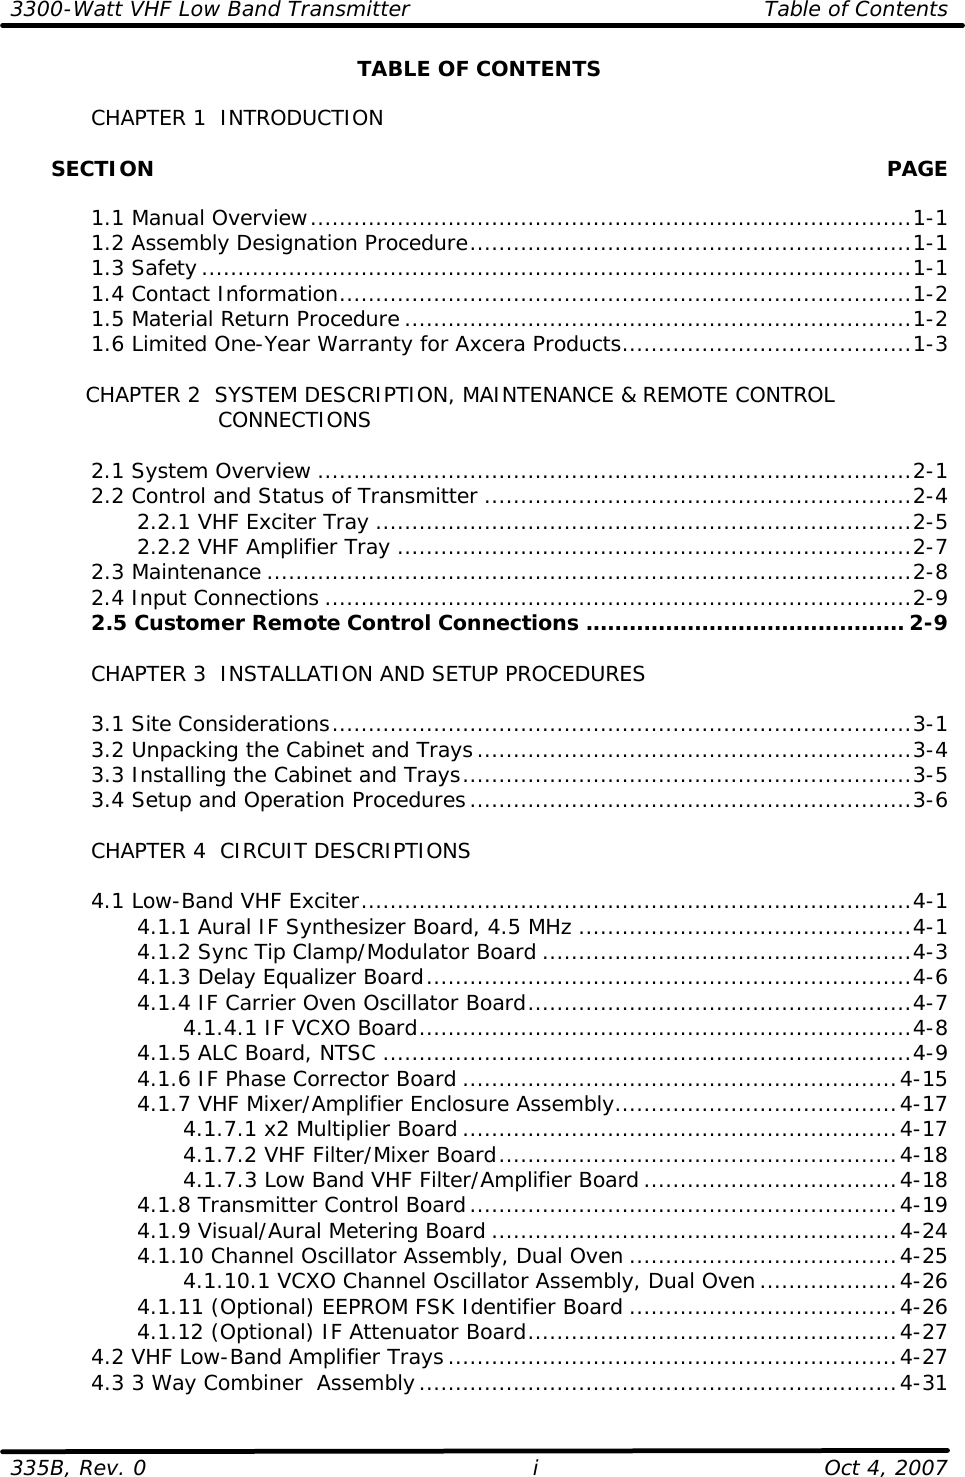 3300-Watt VHF Low Band Transmitter Table of Contents  335B, Rev. 0 i Oct 4, 2007 TABLE OF CONTENTS   CHAPTER 1  INTRODUCTION        SECTION    PAGE   1.1 Manual Overview...................................................................................1-1  1.2 Assembly Designation Procedure.............................................................1-1  1.3 Safety..................................................................................................1-1  1.4 Contact Information...............................................................................1-2  1.5 Material Return Procedure ......................................................................1-2  1.6 Limited One-Year Warranty for Axcera Products........................................1-3   CHAPTER 2  SYSTEM DESCRIPTION, MAINTENANCE &amp; REMOTE CONTROL            CONNECTIONS   2.1 System Overview ..................................................................................2-1  2.2 Control and Status of Transmitter ...........................................................2-4     2.2.1 VHF Exciter Tray ..........................................................................2-5     2.2.2 VHF Amplifier Tray .......................................................................2-7  2.3 Maintenance .........................................................................................2-8  2.4 Input Connections .................................................................................2-9  2.5 Customer Remote Control Connections ............................................ 2-9   CHAPTER 3  INSTALLATION AND SETUP PROCEDURES     3.1 Site Considerations................................................................................3-1  3.2 Unpacking the Cabinet and Trays............................................................3-4  3.3 Installing the Cabinet and Trays..............................................................3-5  3.4 Setup and Operation Procedures.............................................................3-6   CHAPTER 4  CIRCUIT DESCRIPTIONS   4.1 Low-Band VHF Exciter............................................................................4-1     4.1.1 Aural IF Synthesizer Board, 4.5 MHz ..............................................4-1     4.1.2 Sync Tip Clamp/Modulator Board ...................................................4-3     4.1.3 Delay Equalizer Board...................................................................4-6     4.1.4 IF Carrier Oven Oscillator Board.....................................................4-7     4.1.4.1 IF VCXO Board....................................................................4-8     4.1.5 ALC Board, NTSC .........................................................................4-9     4.1.6 IF Phase Corrector Board ............................................................4-15     4.1.7 VHF Mixer/Amplifier Enclosure Assembly.......................................4-17     4.1.7.1 x2 Multiplier Board ............................................................4-17     4.1.7.2 VHF Filter/Mixer Board.......................................................4-18     4.1.7.3 Low Band VHF Filter/Amplifier Board ...................................4-18     4.1.8 Transmitter Control Board...........................................................4-19     4.1.9 Visual/Aural Metering Board ........................................................4-24     4.1.10 Channel Oscillator Assembly, Dual Oven .....................................4-25     4.1.10.1 VCXO Channel Oscillator Assembly, Dual Oven...................4-26     4.1.11 (Optional) EEPROM FSK Identifier Board .....................................4-26     4.1.12 (Optional) IF Attenuator Board...................................................4-27  4.2 VHF Low-Band Amplifier Trays..............................................................4-27  4.3 3 Way Combiner  Assembly..................................................................4-31 